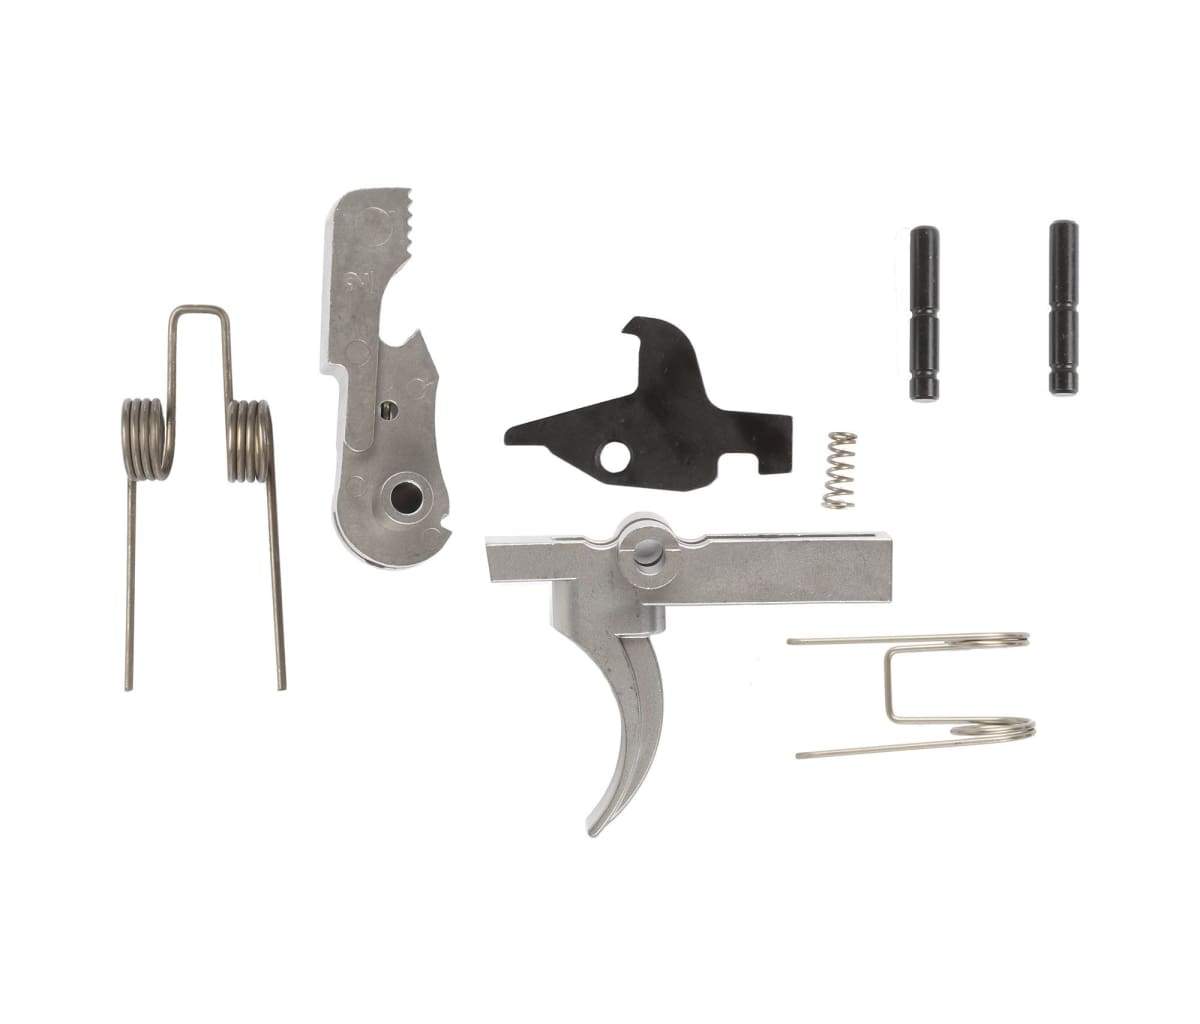 Single stage lower parts kit